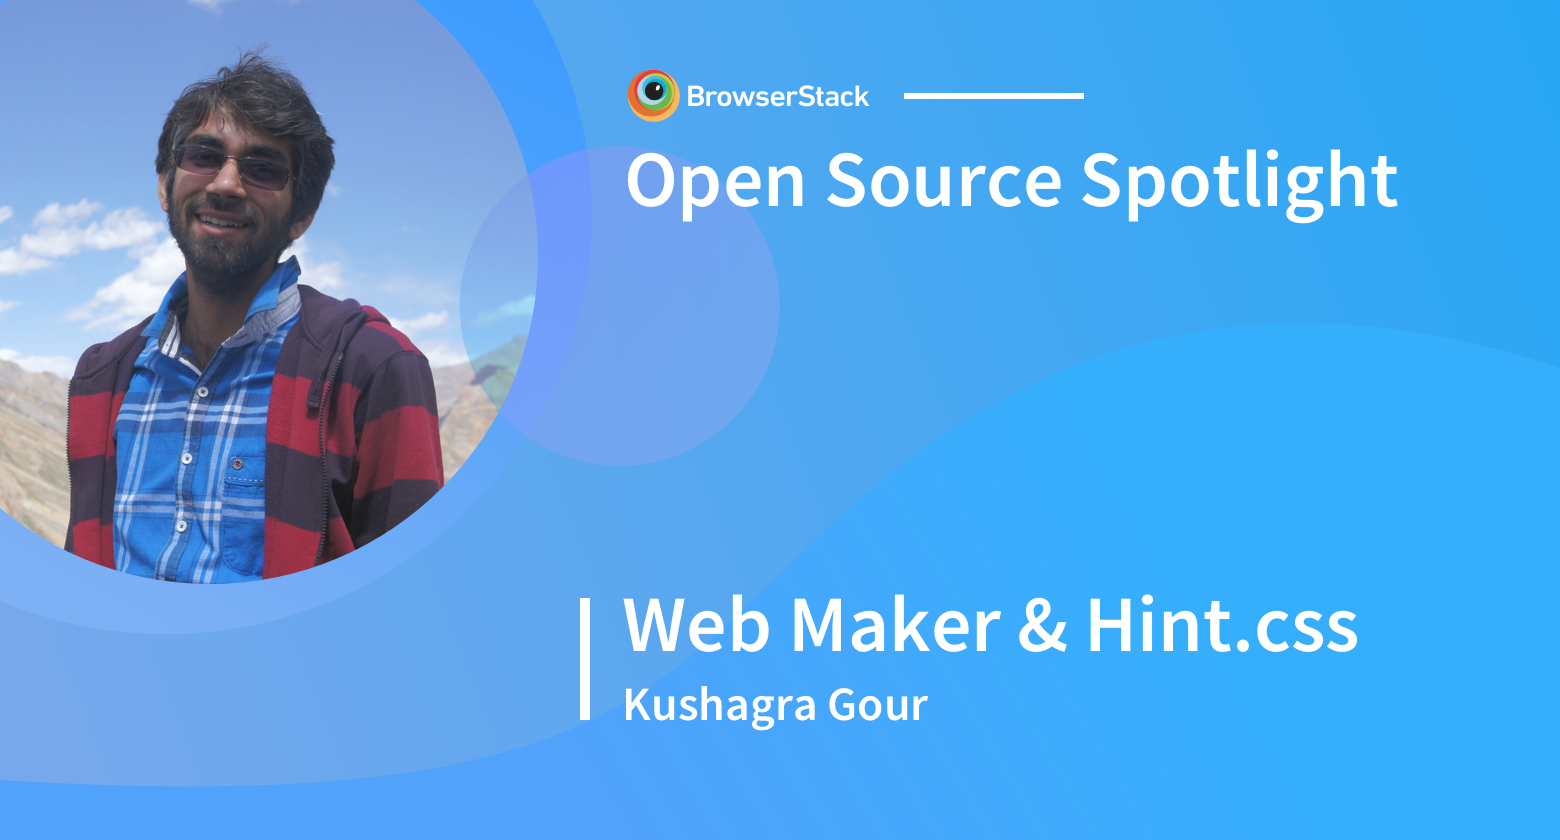 Open Source Spotlight: Web Maker and Hint.css with Kushagra Gour